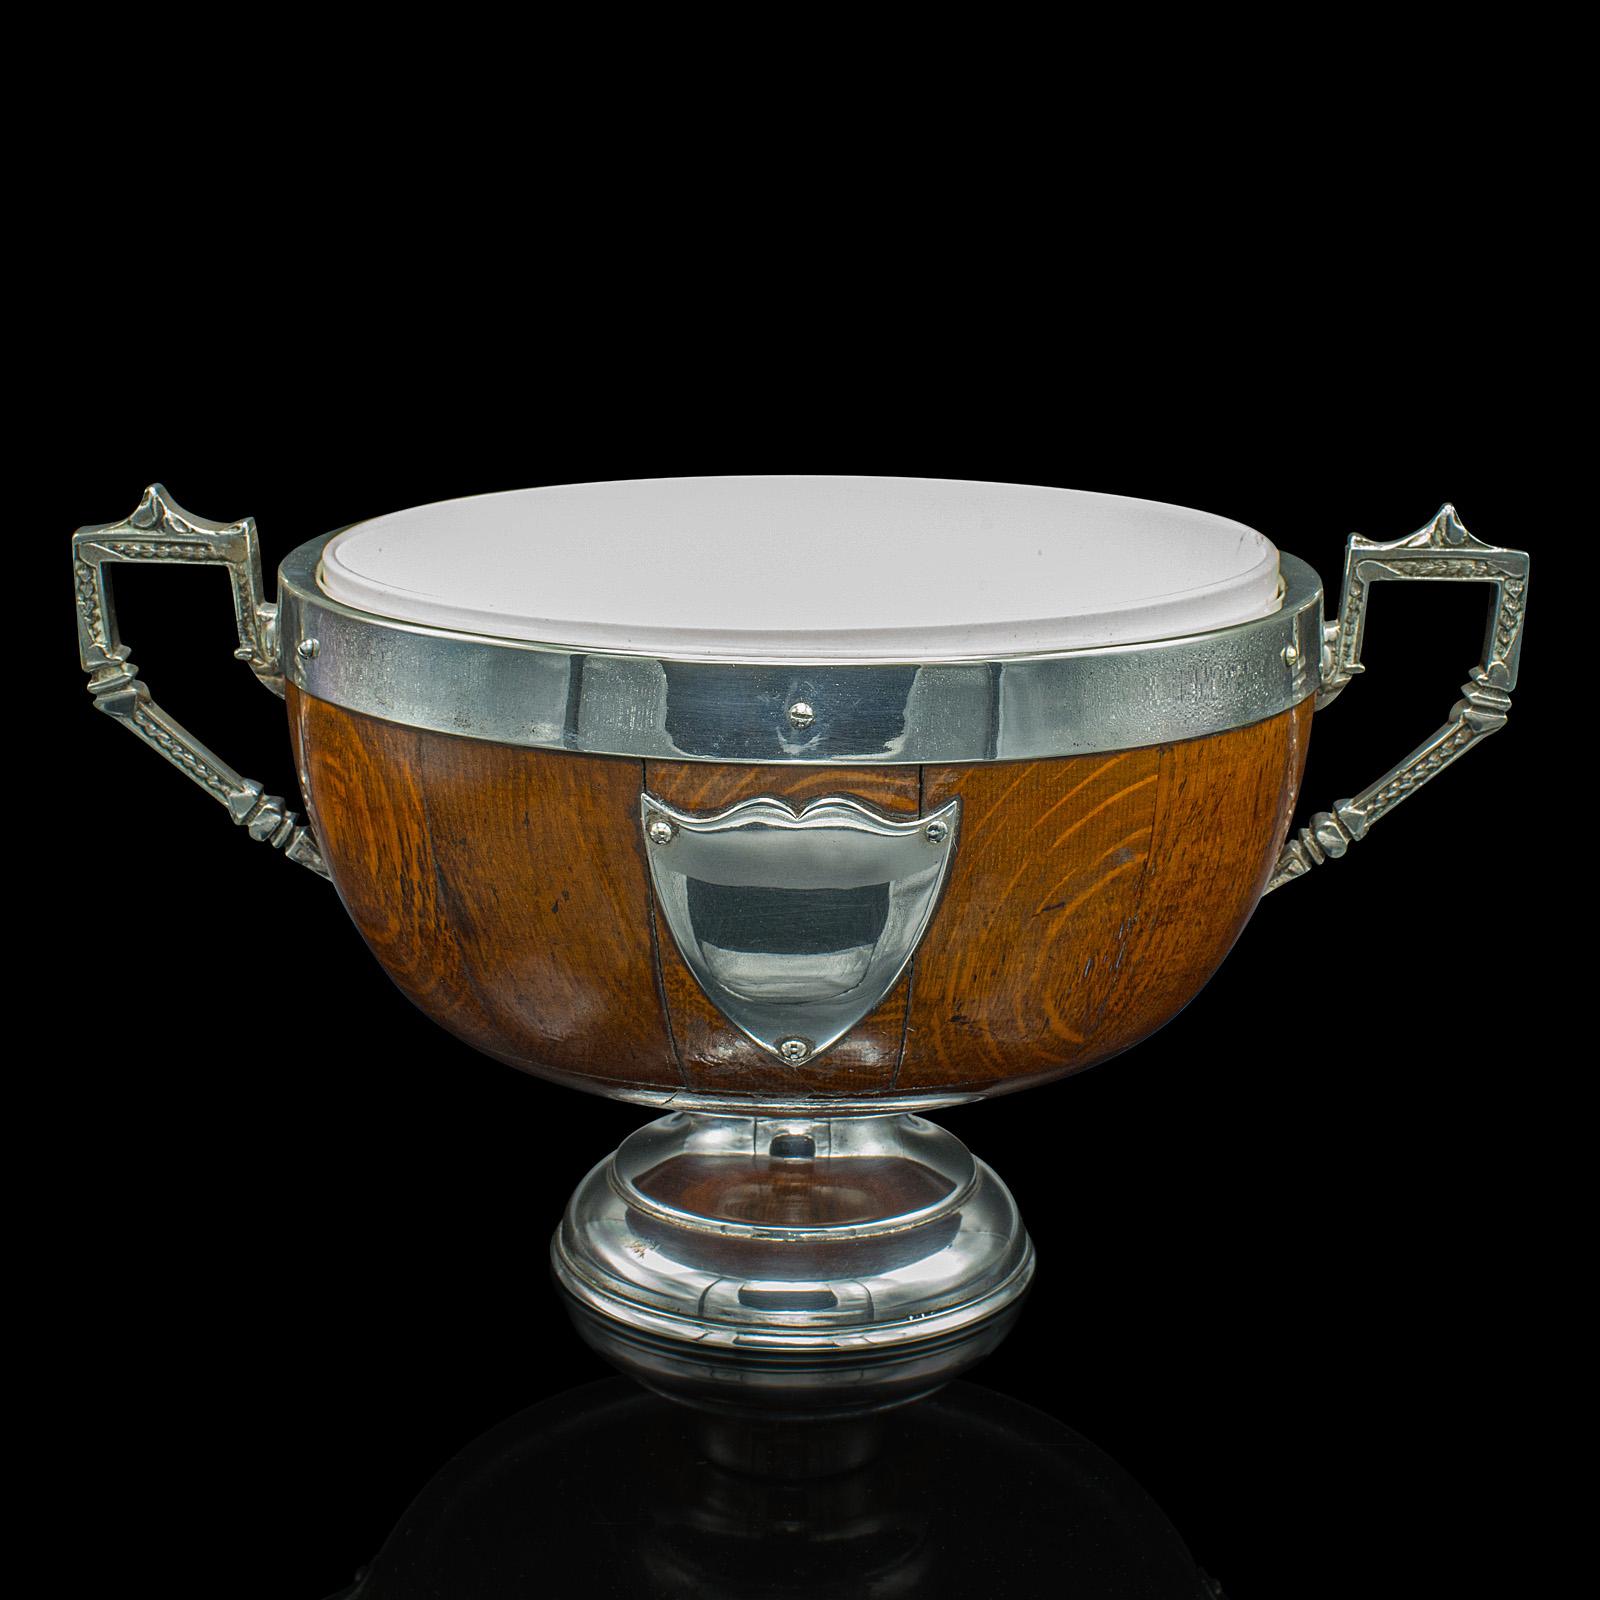 This is an antique trophy bowl. An English, oak and silver plated decorative dish by George Goodfellow & Sons of London, dating to the Edwardian period, circa 1910.

Fascinating appearance, with delightful quality and colour
Displays a desirable